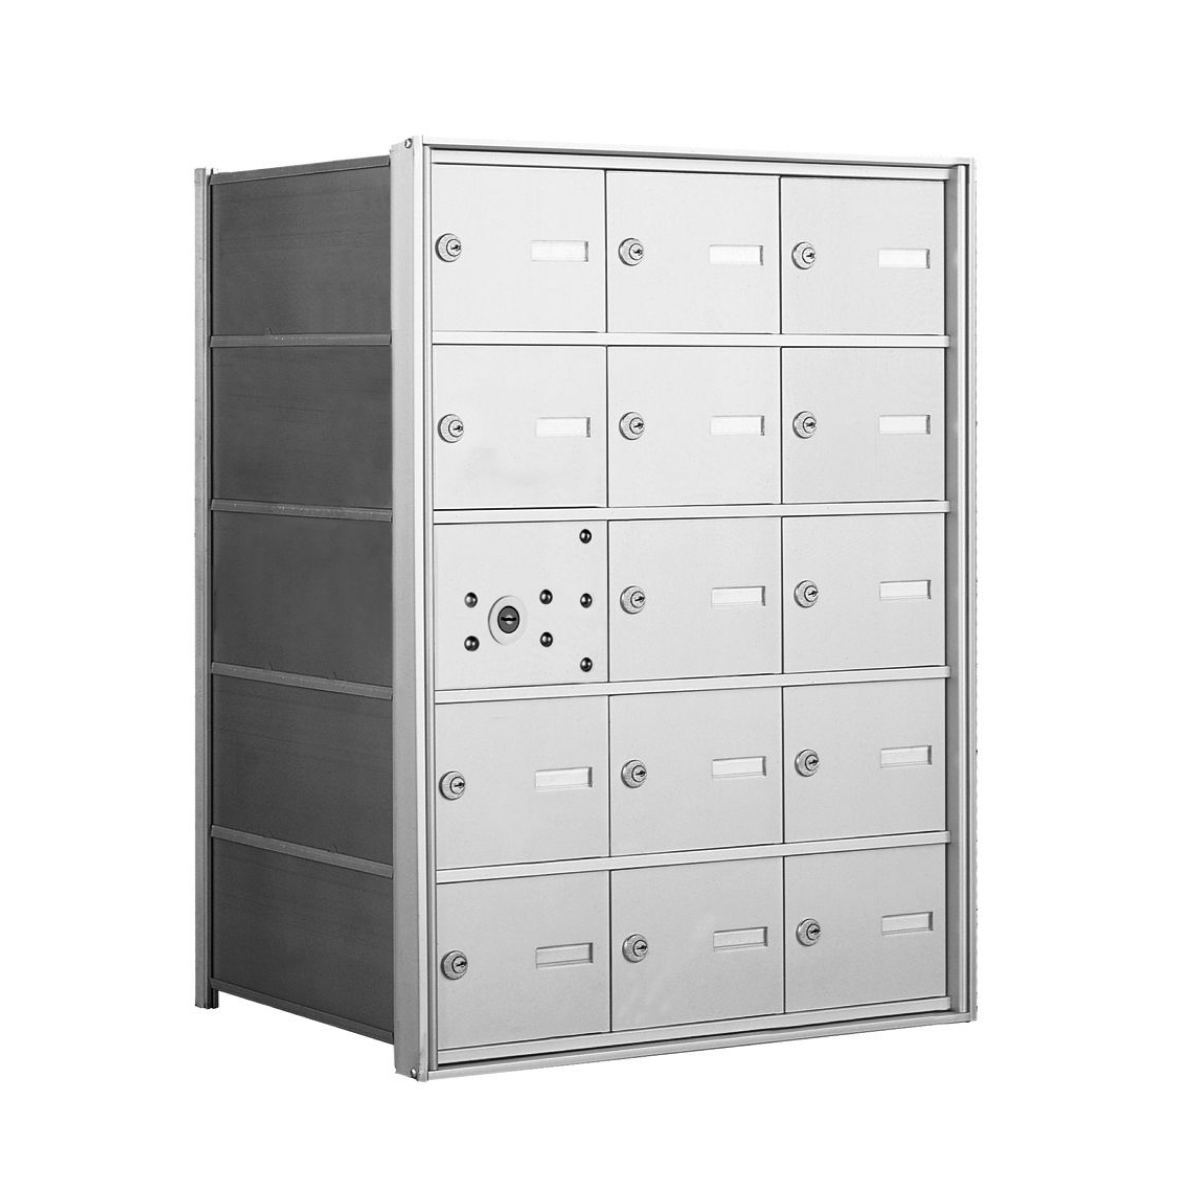 1400 Series Front-Loading Horizontal Mailboxes in Anodized Aluminum Finish – 14 Tenant Doors And 1 USPS Master Door Product Image